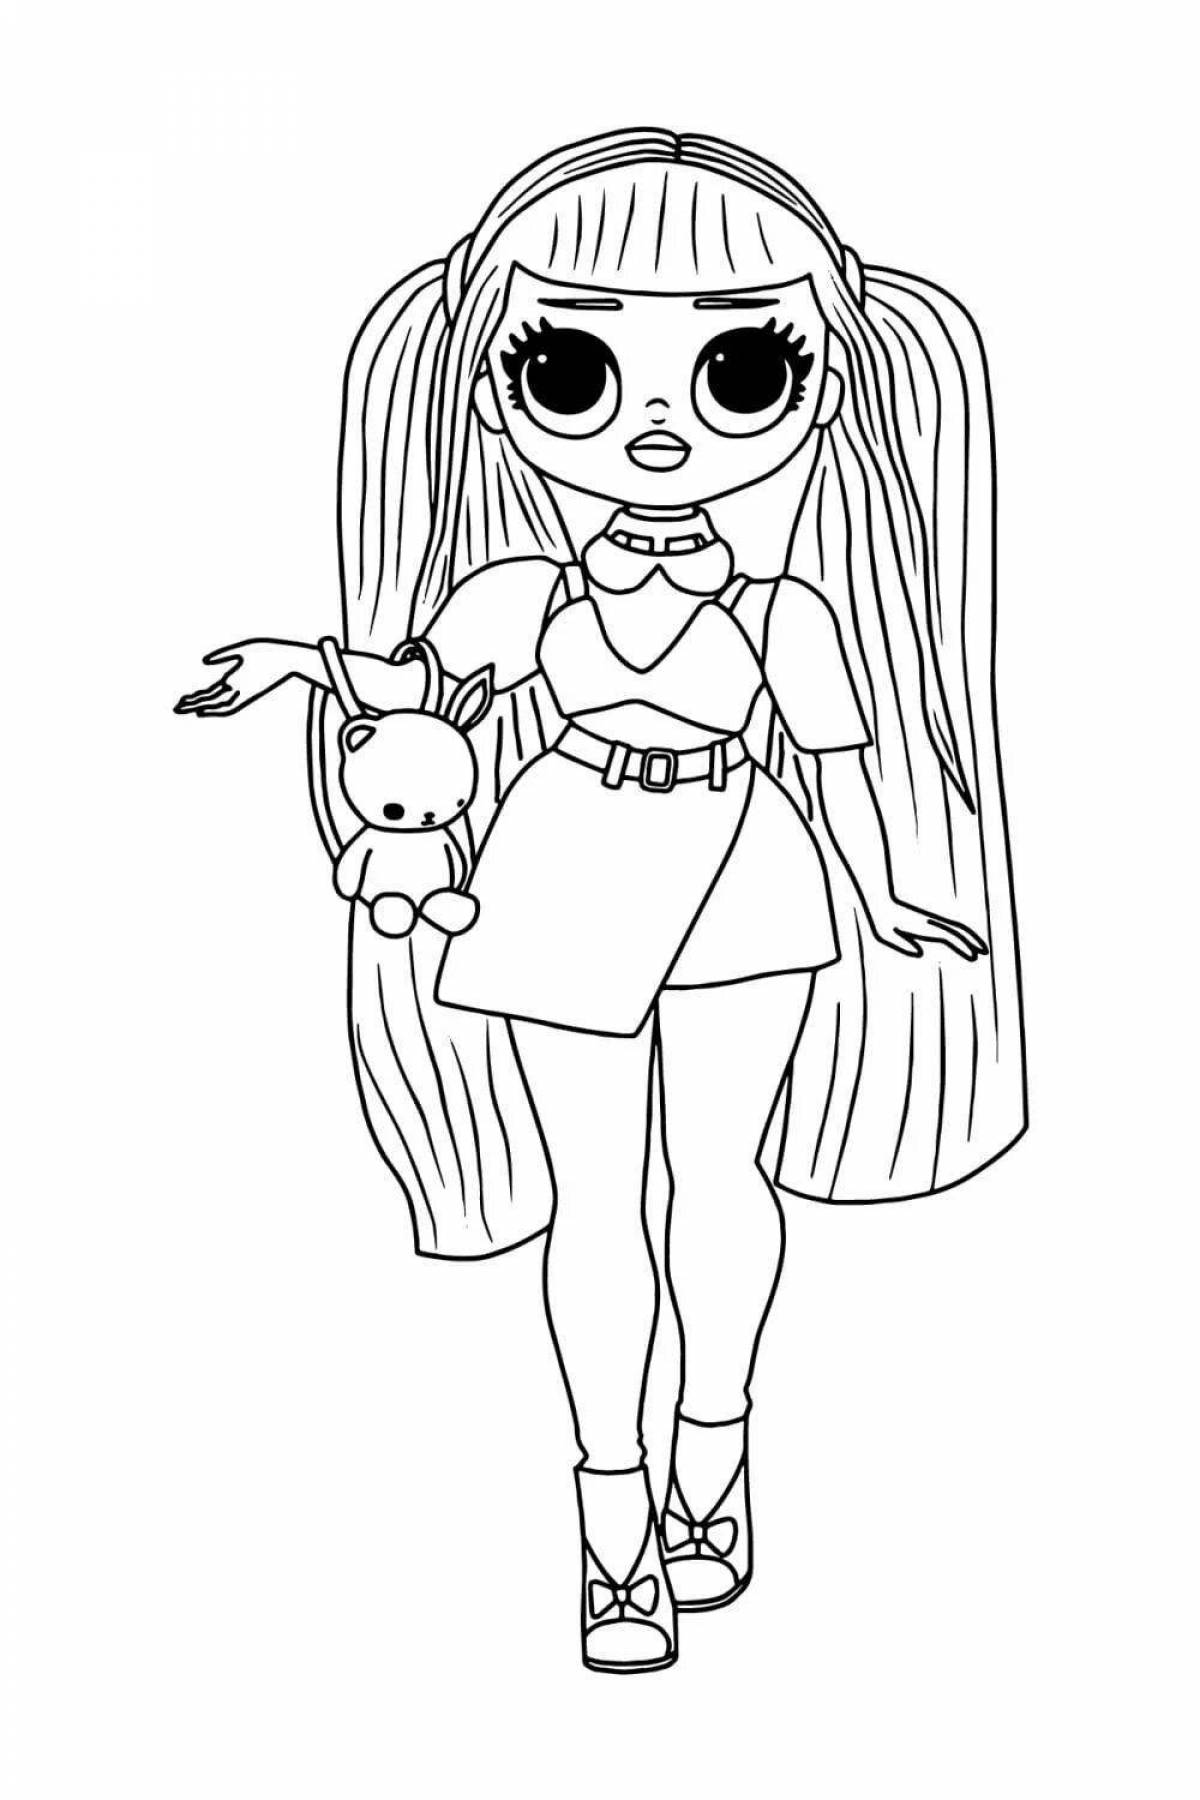 Fairy doll lol teen coloring page